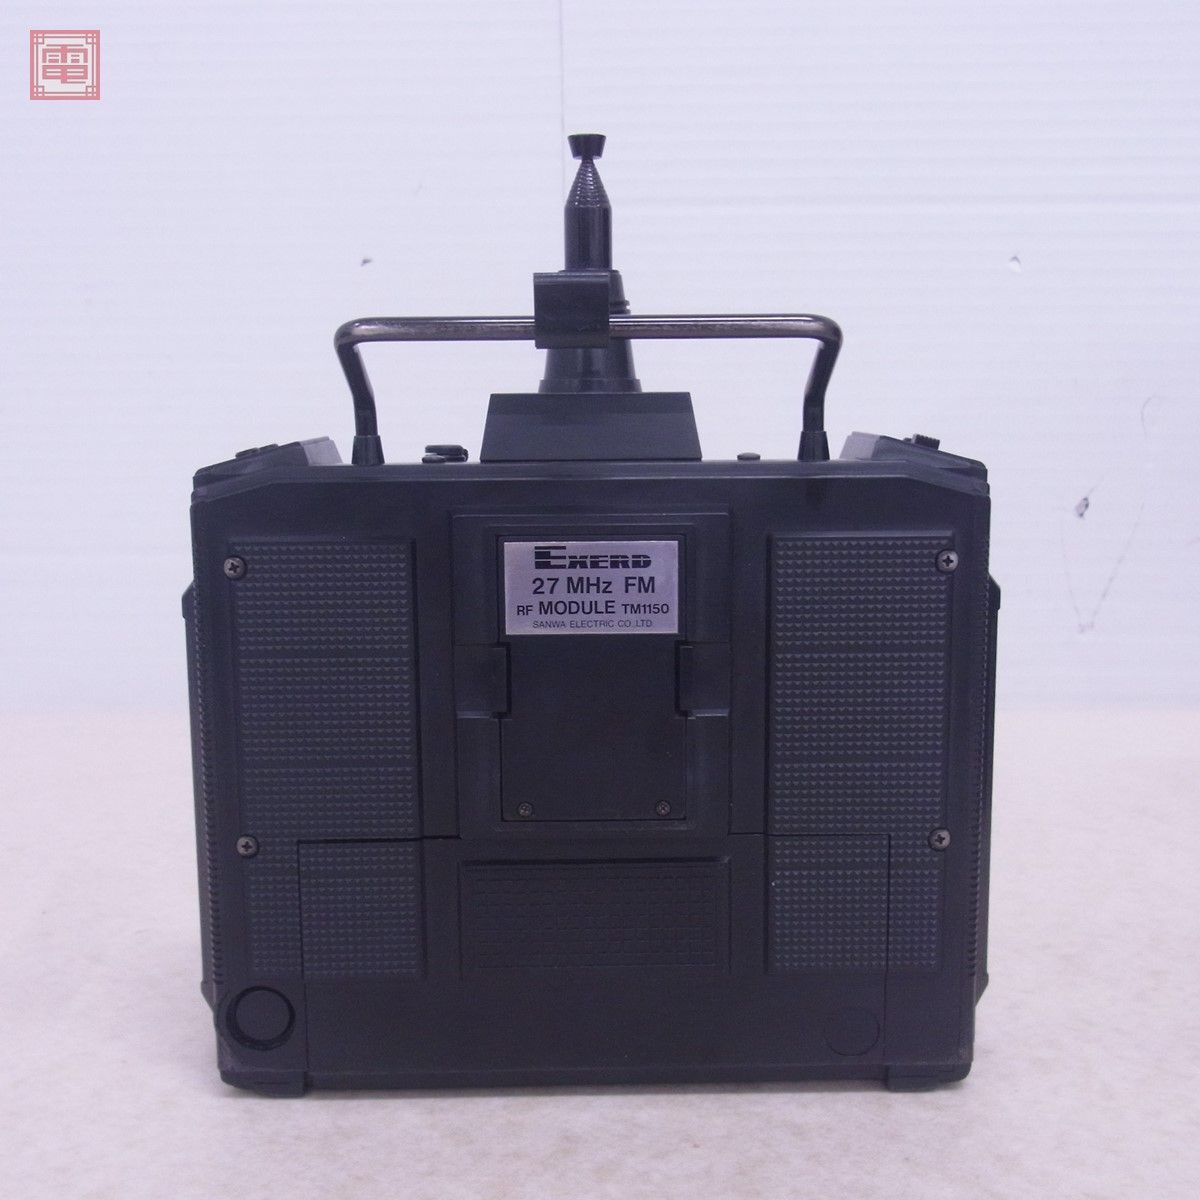  Sanwa EXERD Propo transmitter 27MHz FM RF MODULE TM1150 case attaching electric RC radio-controller SANWA electrification only verification settled present condition goods [20